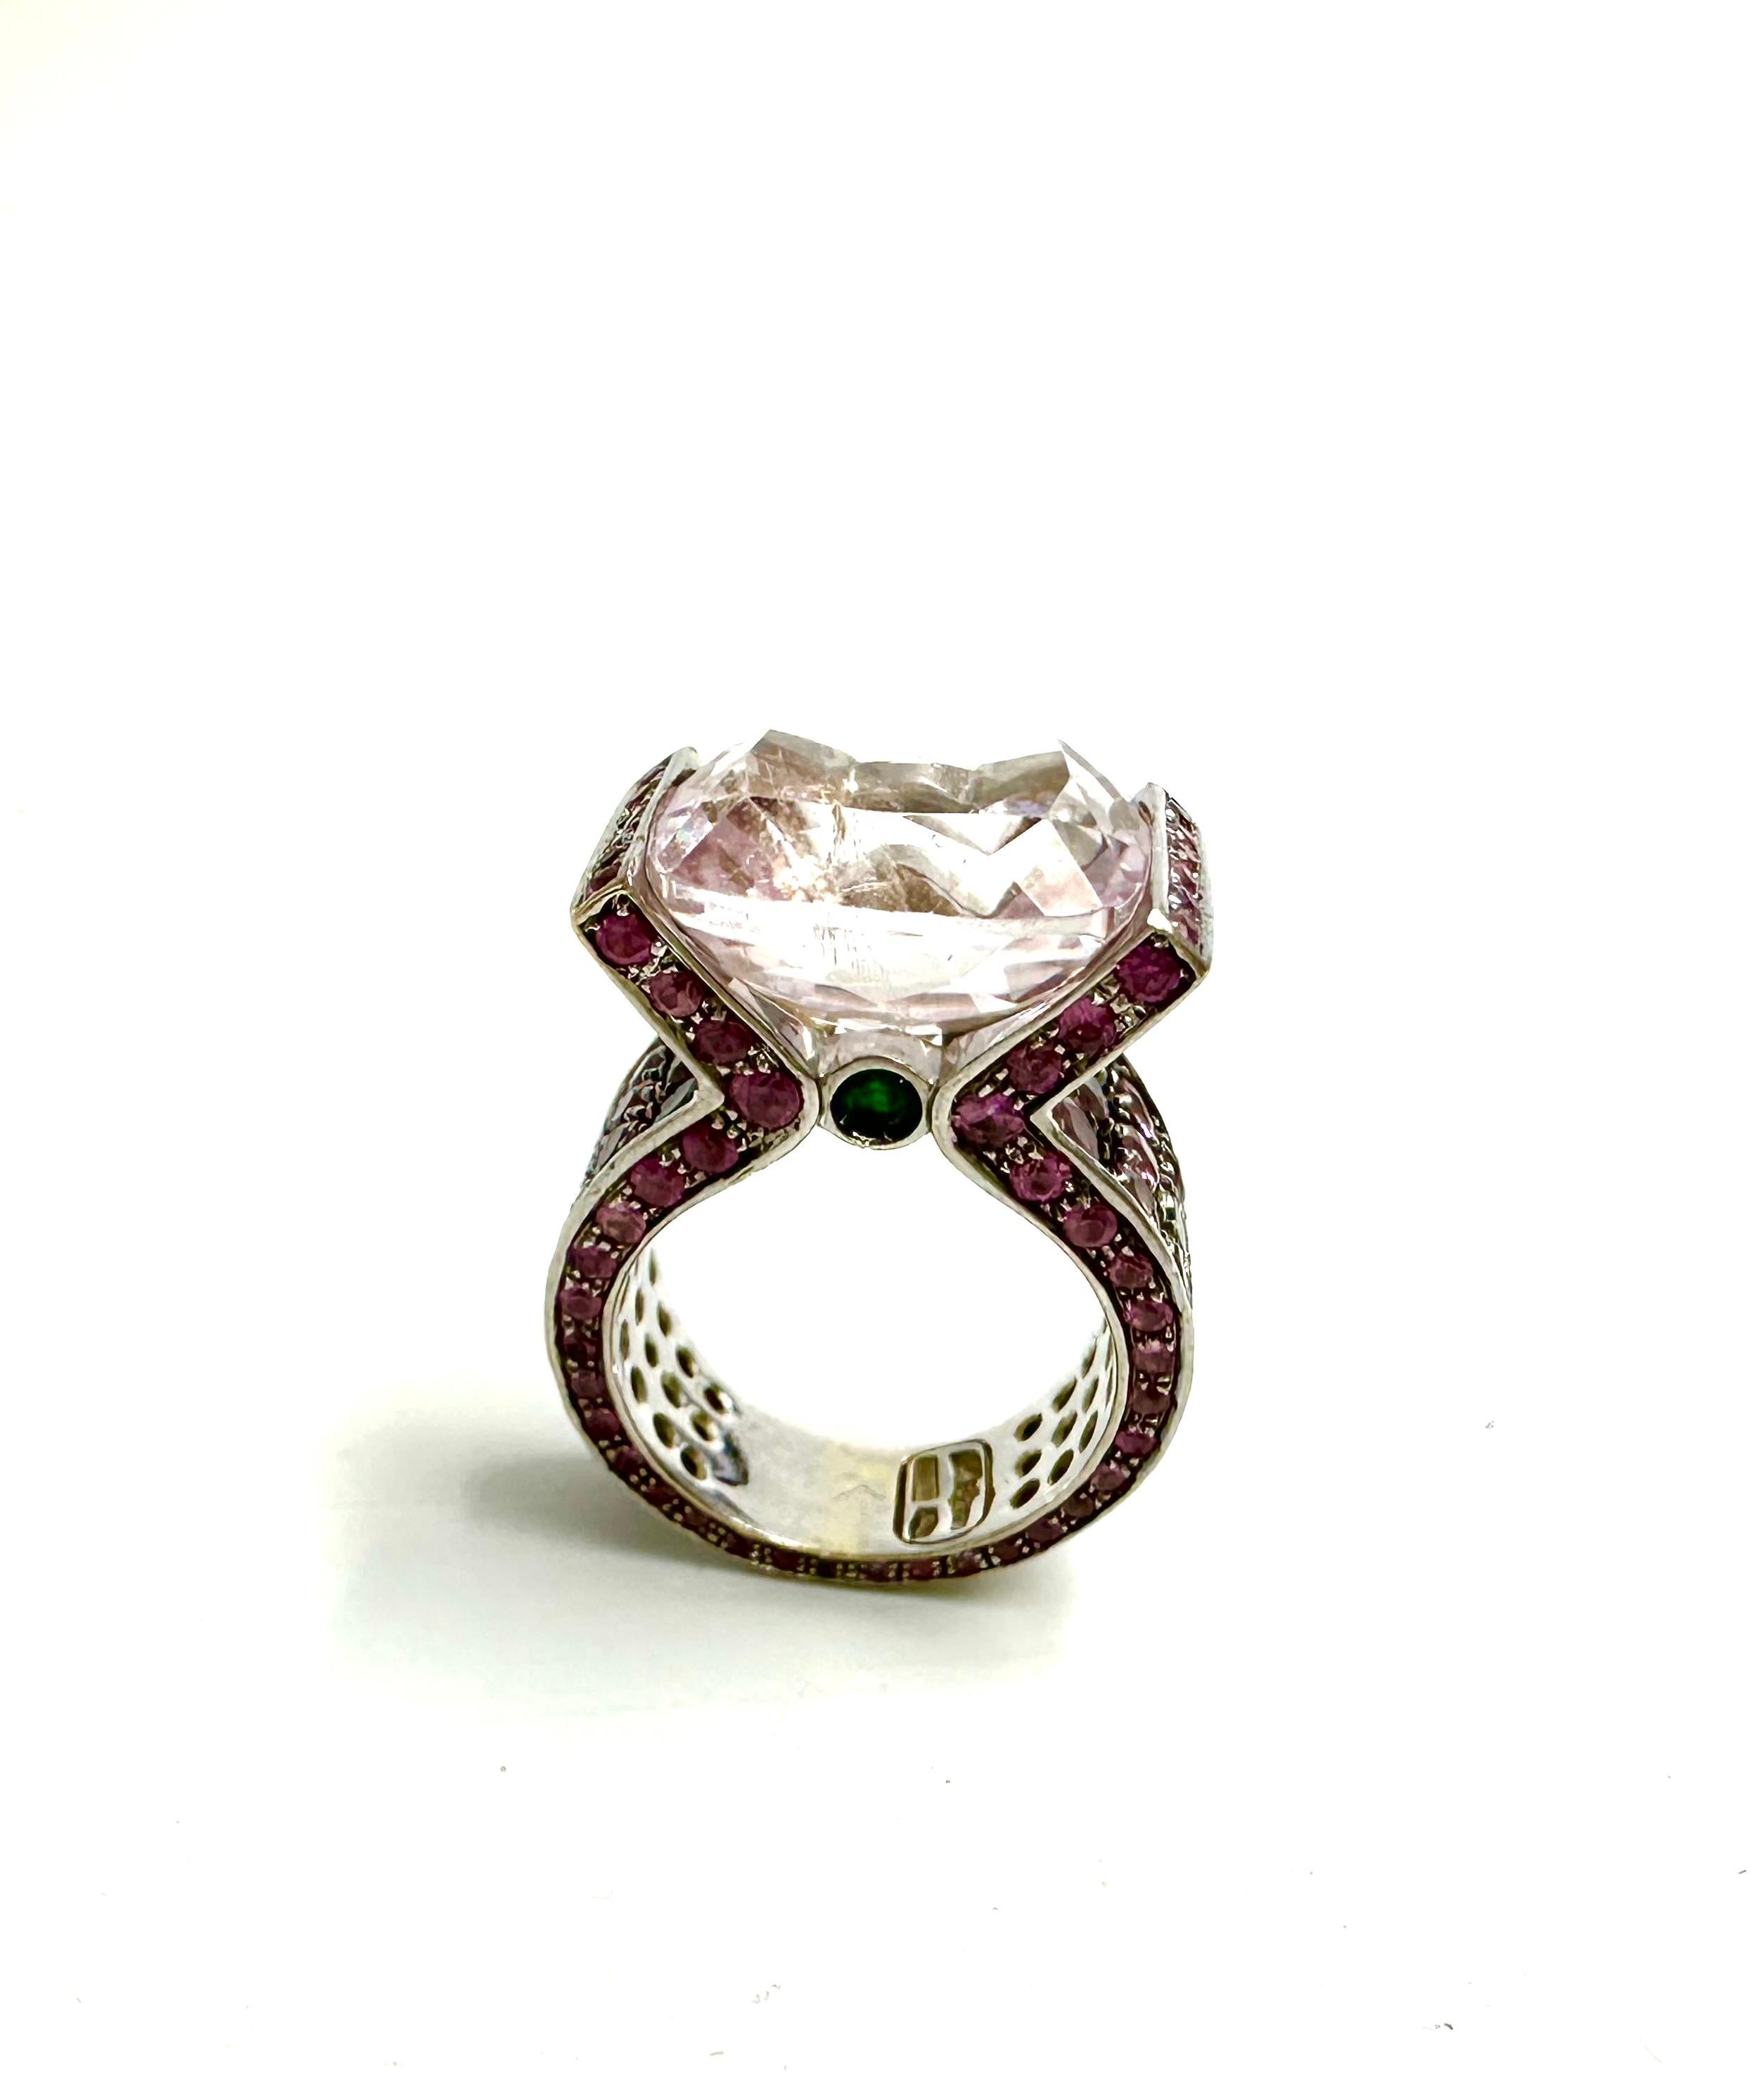 Cushion Cut Cocktail ring with kunzite and tsavorites, by Paolo Piovan For Sale